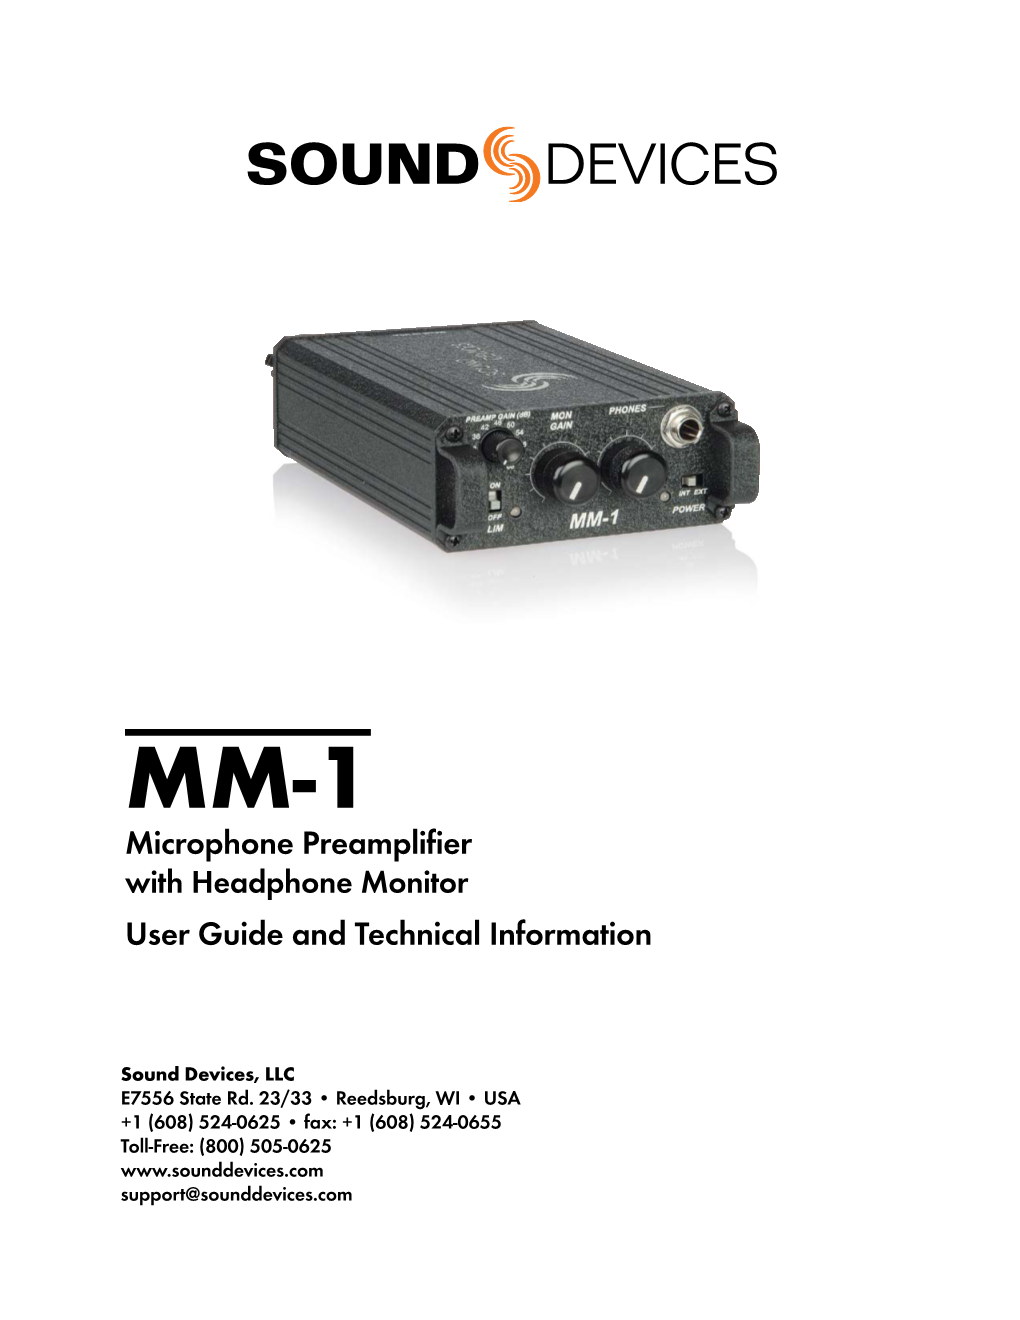 MM-1 Microphone Preamplifier with Headphone Monitor User Guide and Technical Information